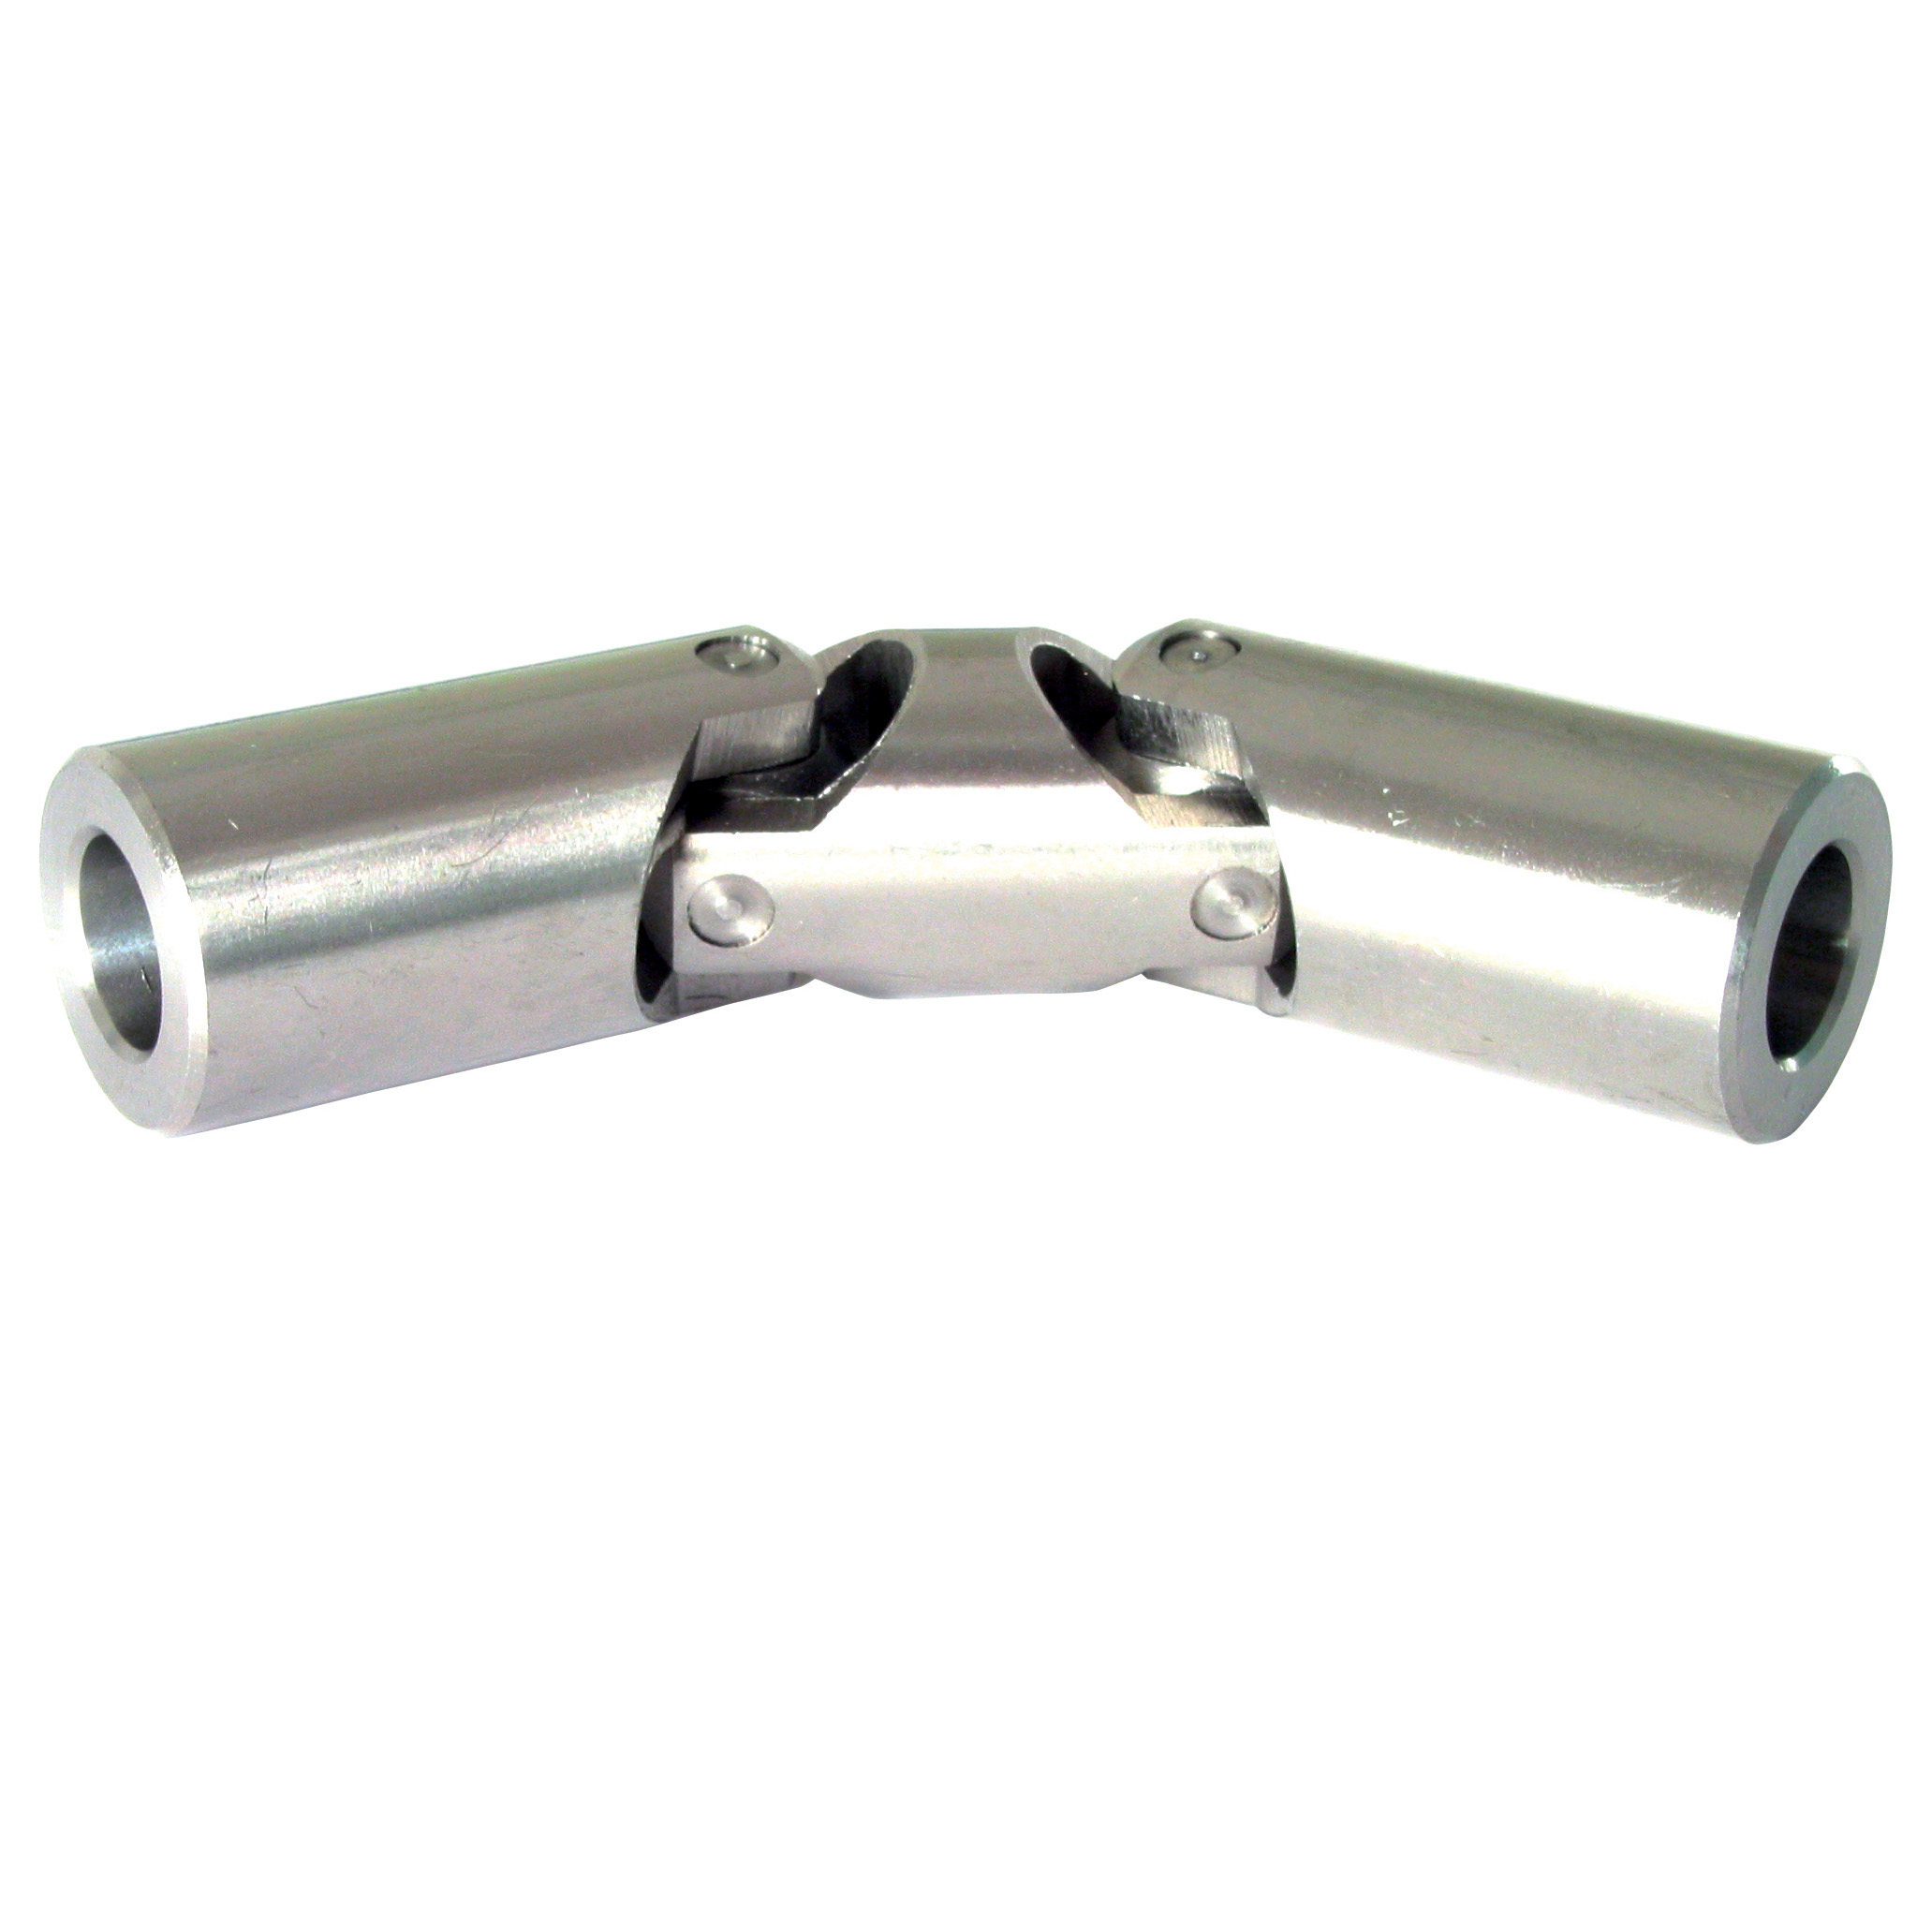 Double universal joint - Stainless steel - Low duty - Plain bearings - 